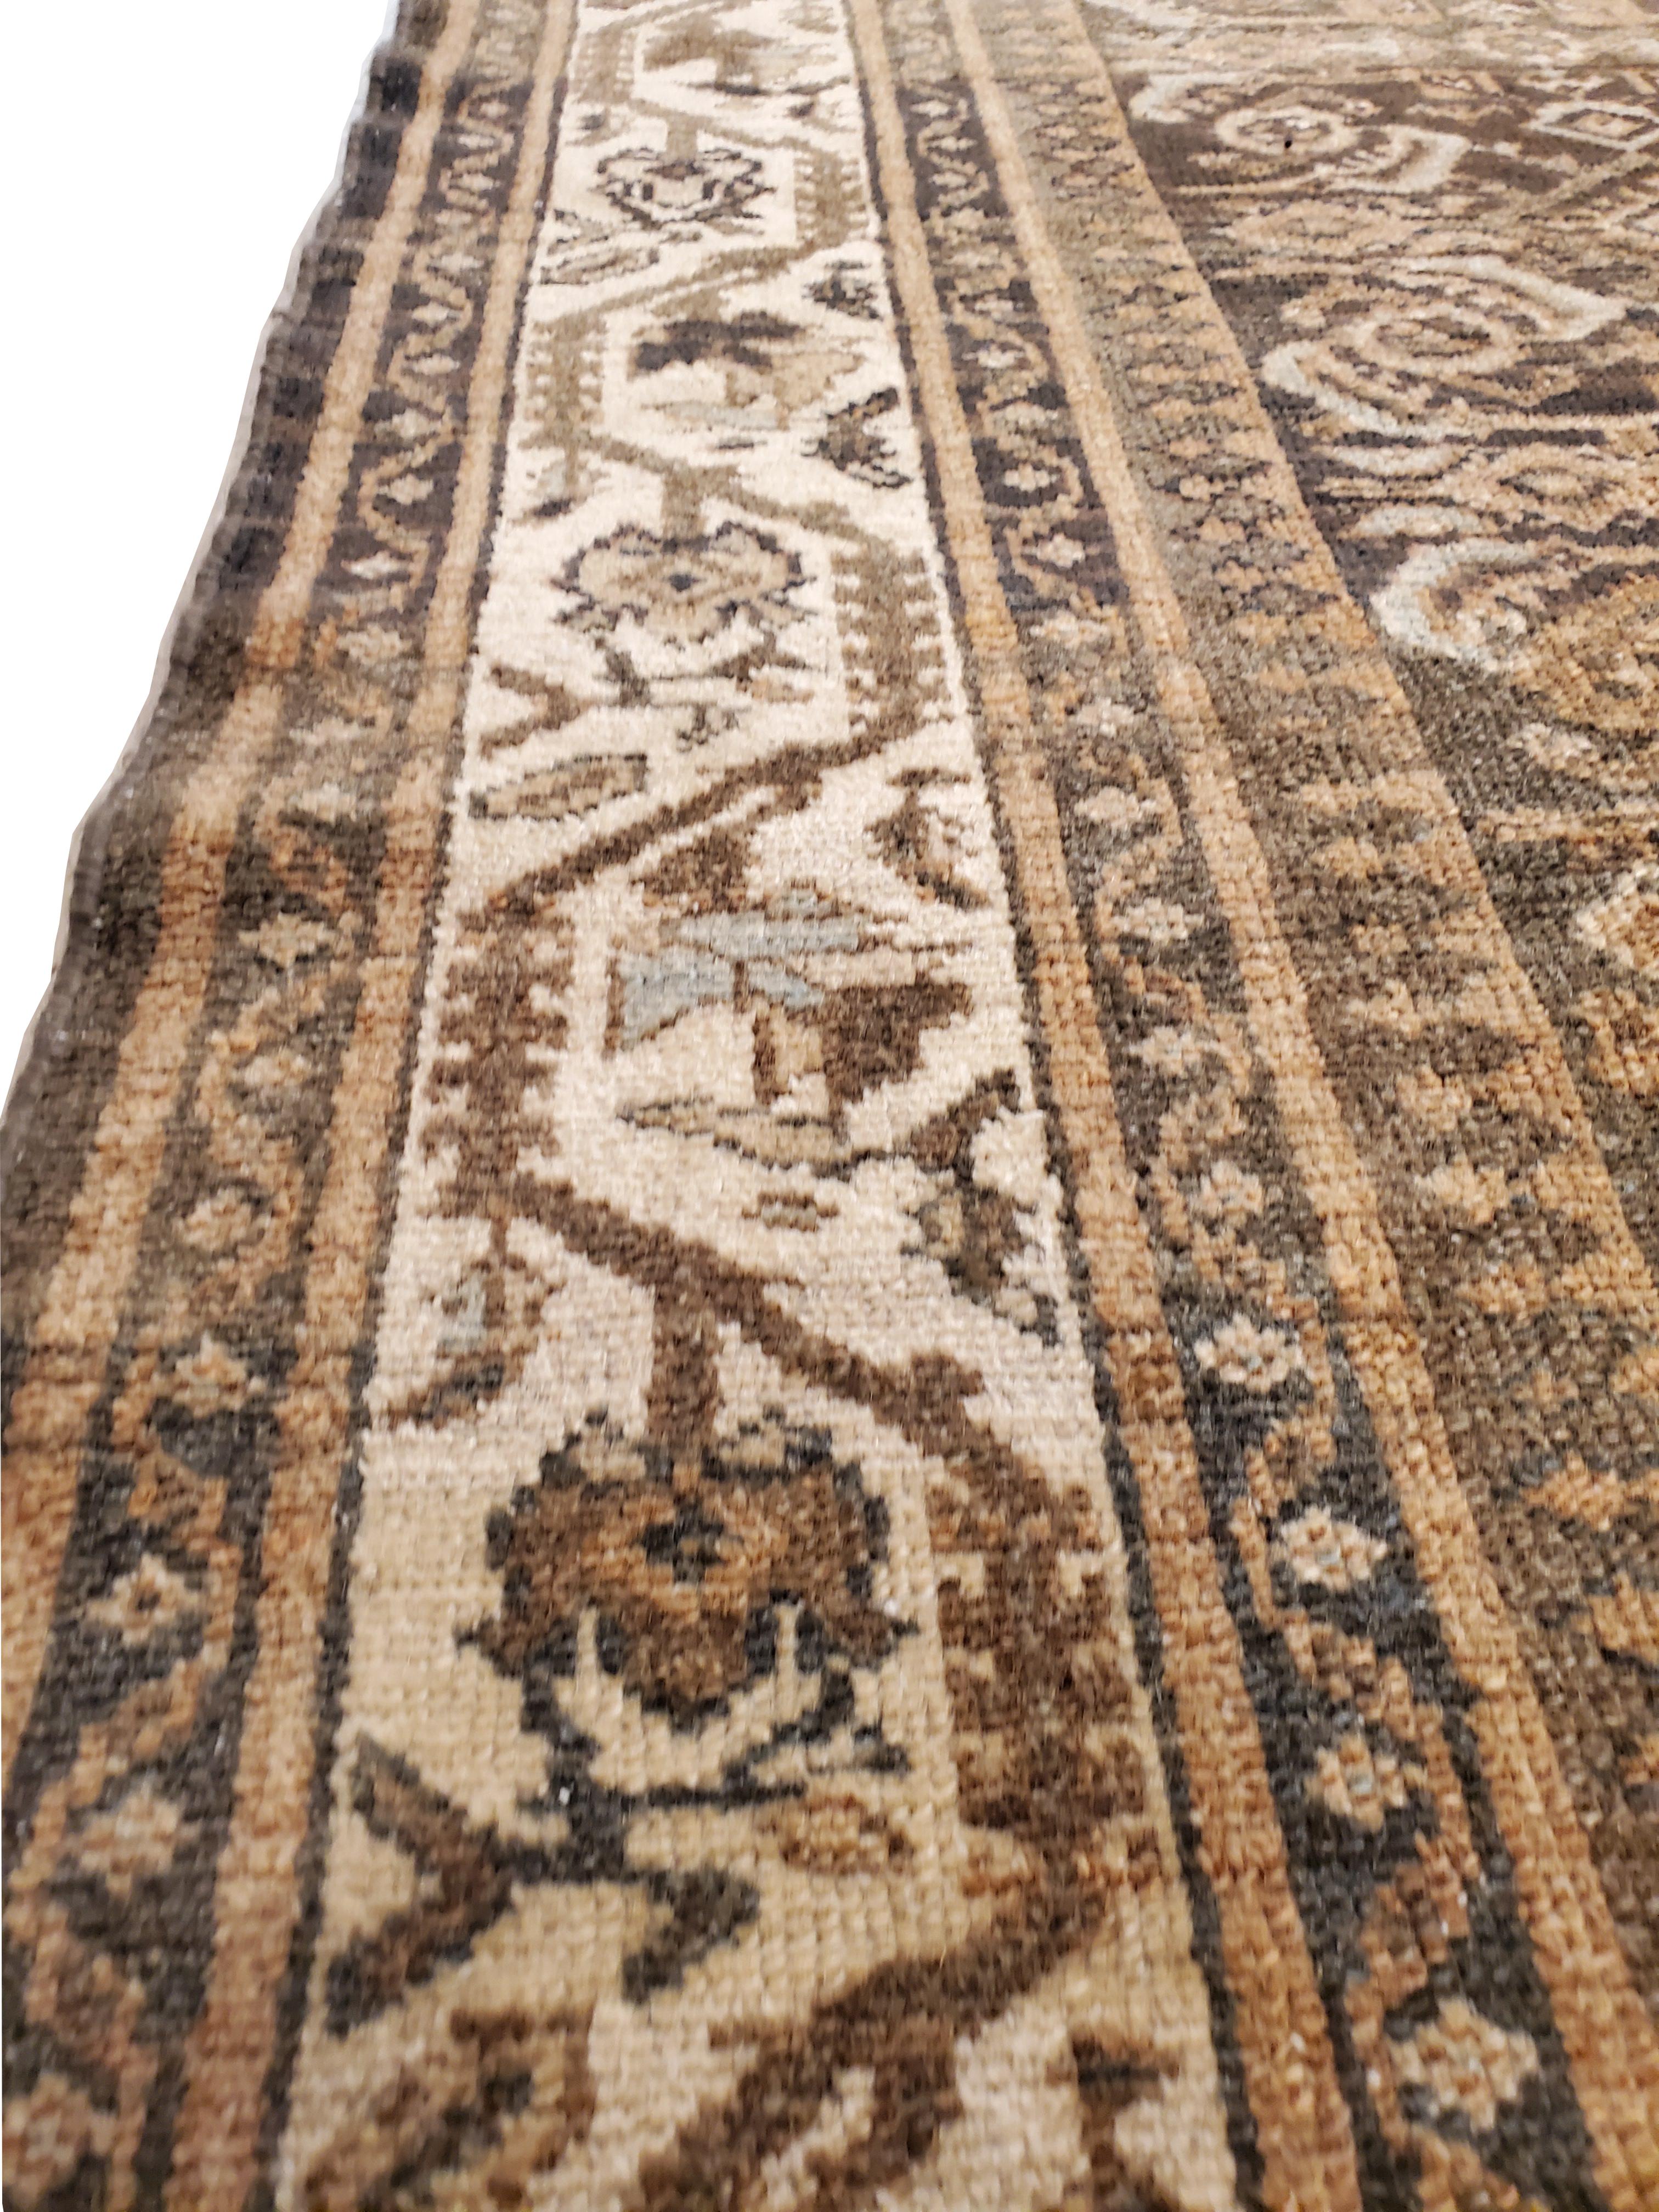 Antique Malayer Carpet, Handmade Oriental Rug, Green, Gray, Taupe, Fine Allover In Good Condition For Sale In Port Washington, NY